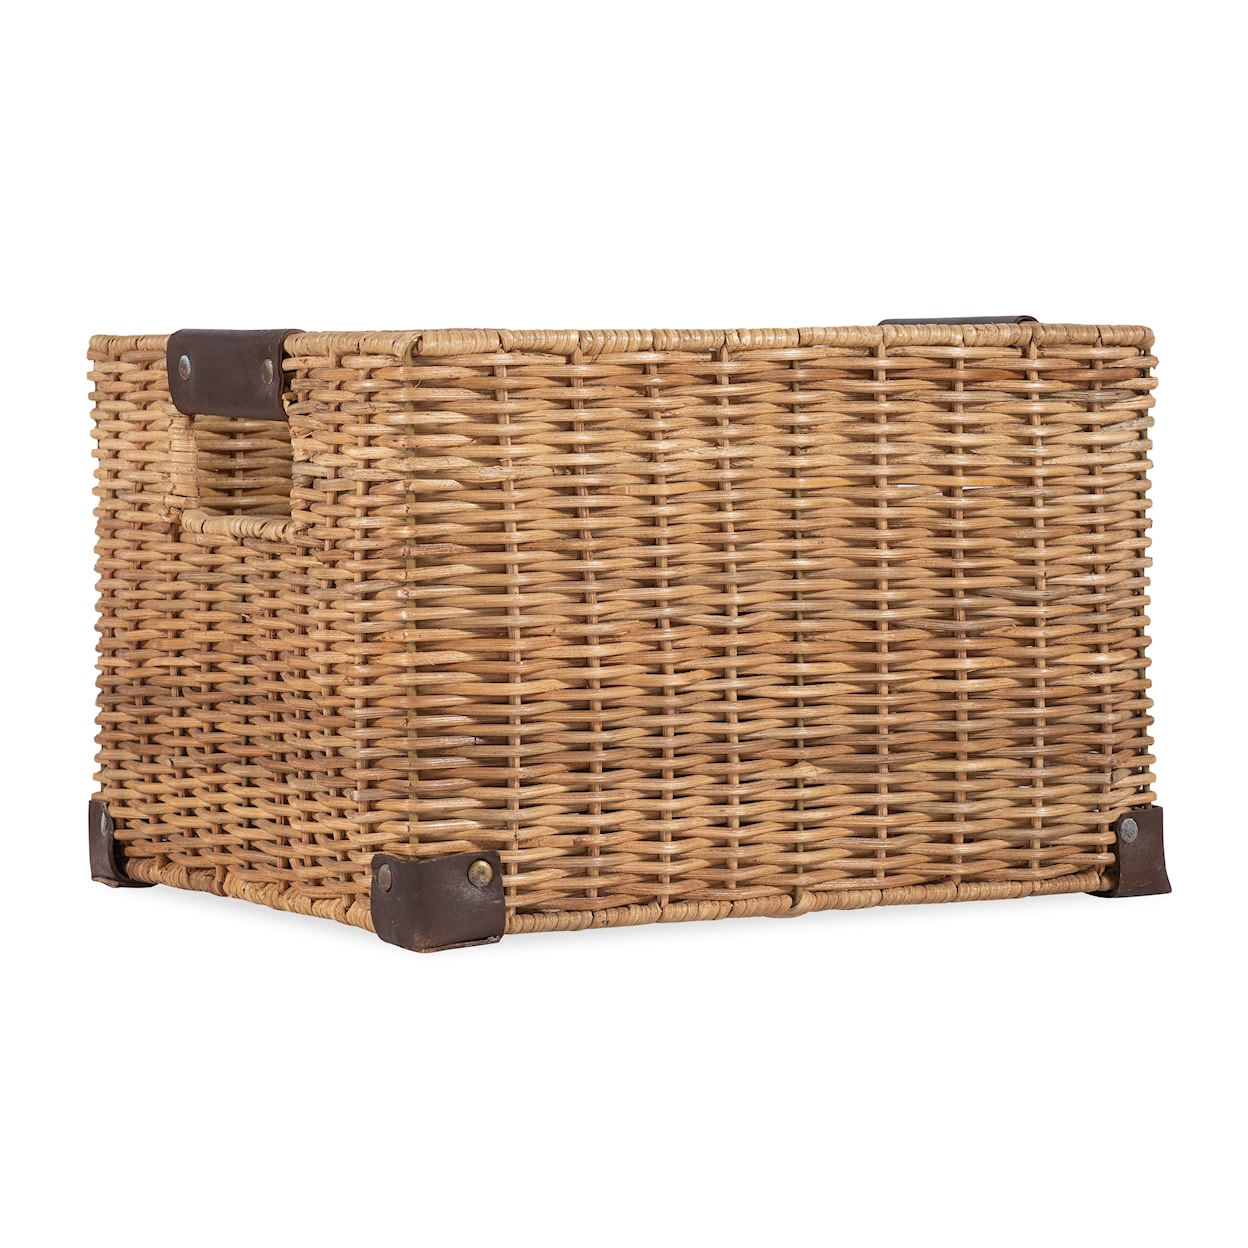 BOBO Intriguing Objects BOBO Intriguing Objects Western Style Natural Record Basket